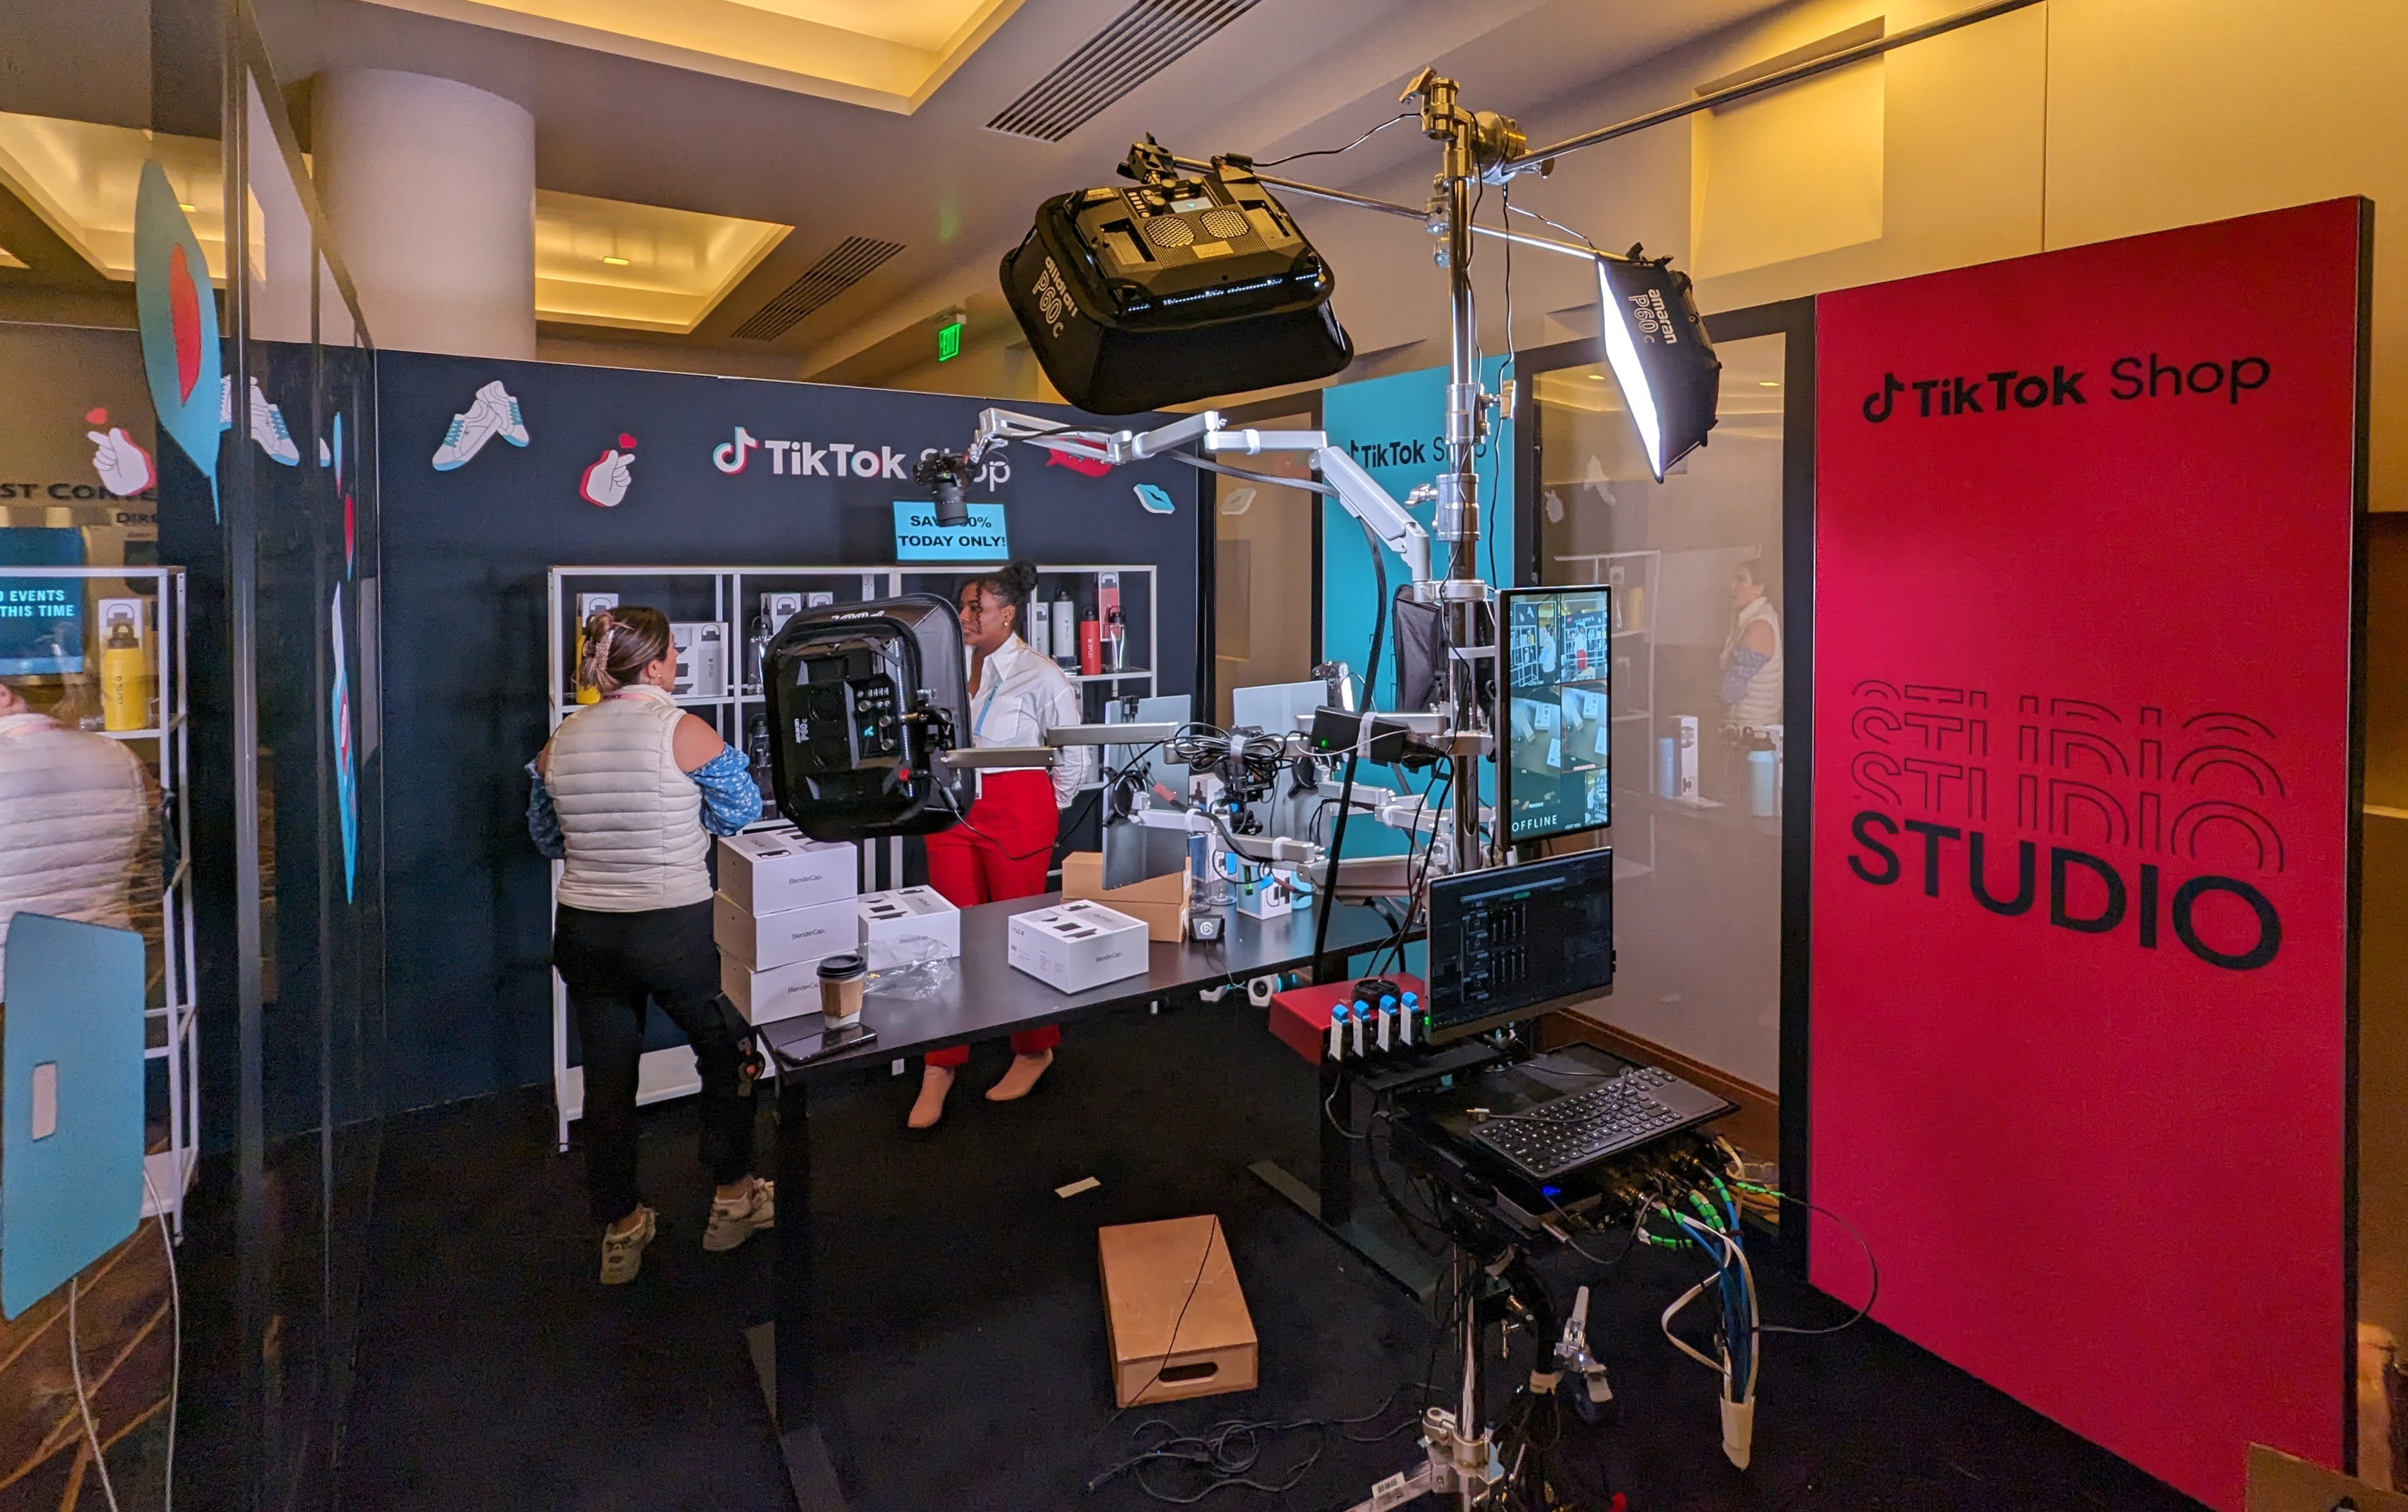 TikTok Shop and an online influencer prepare for a live-streaming session of selling goods from the Consumer Electronics Show (CES) at the Aria Resort & Casino in Las Vegas on January 10, 2024. Photo: SCMP / Matt Haldane